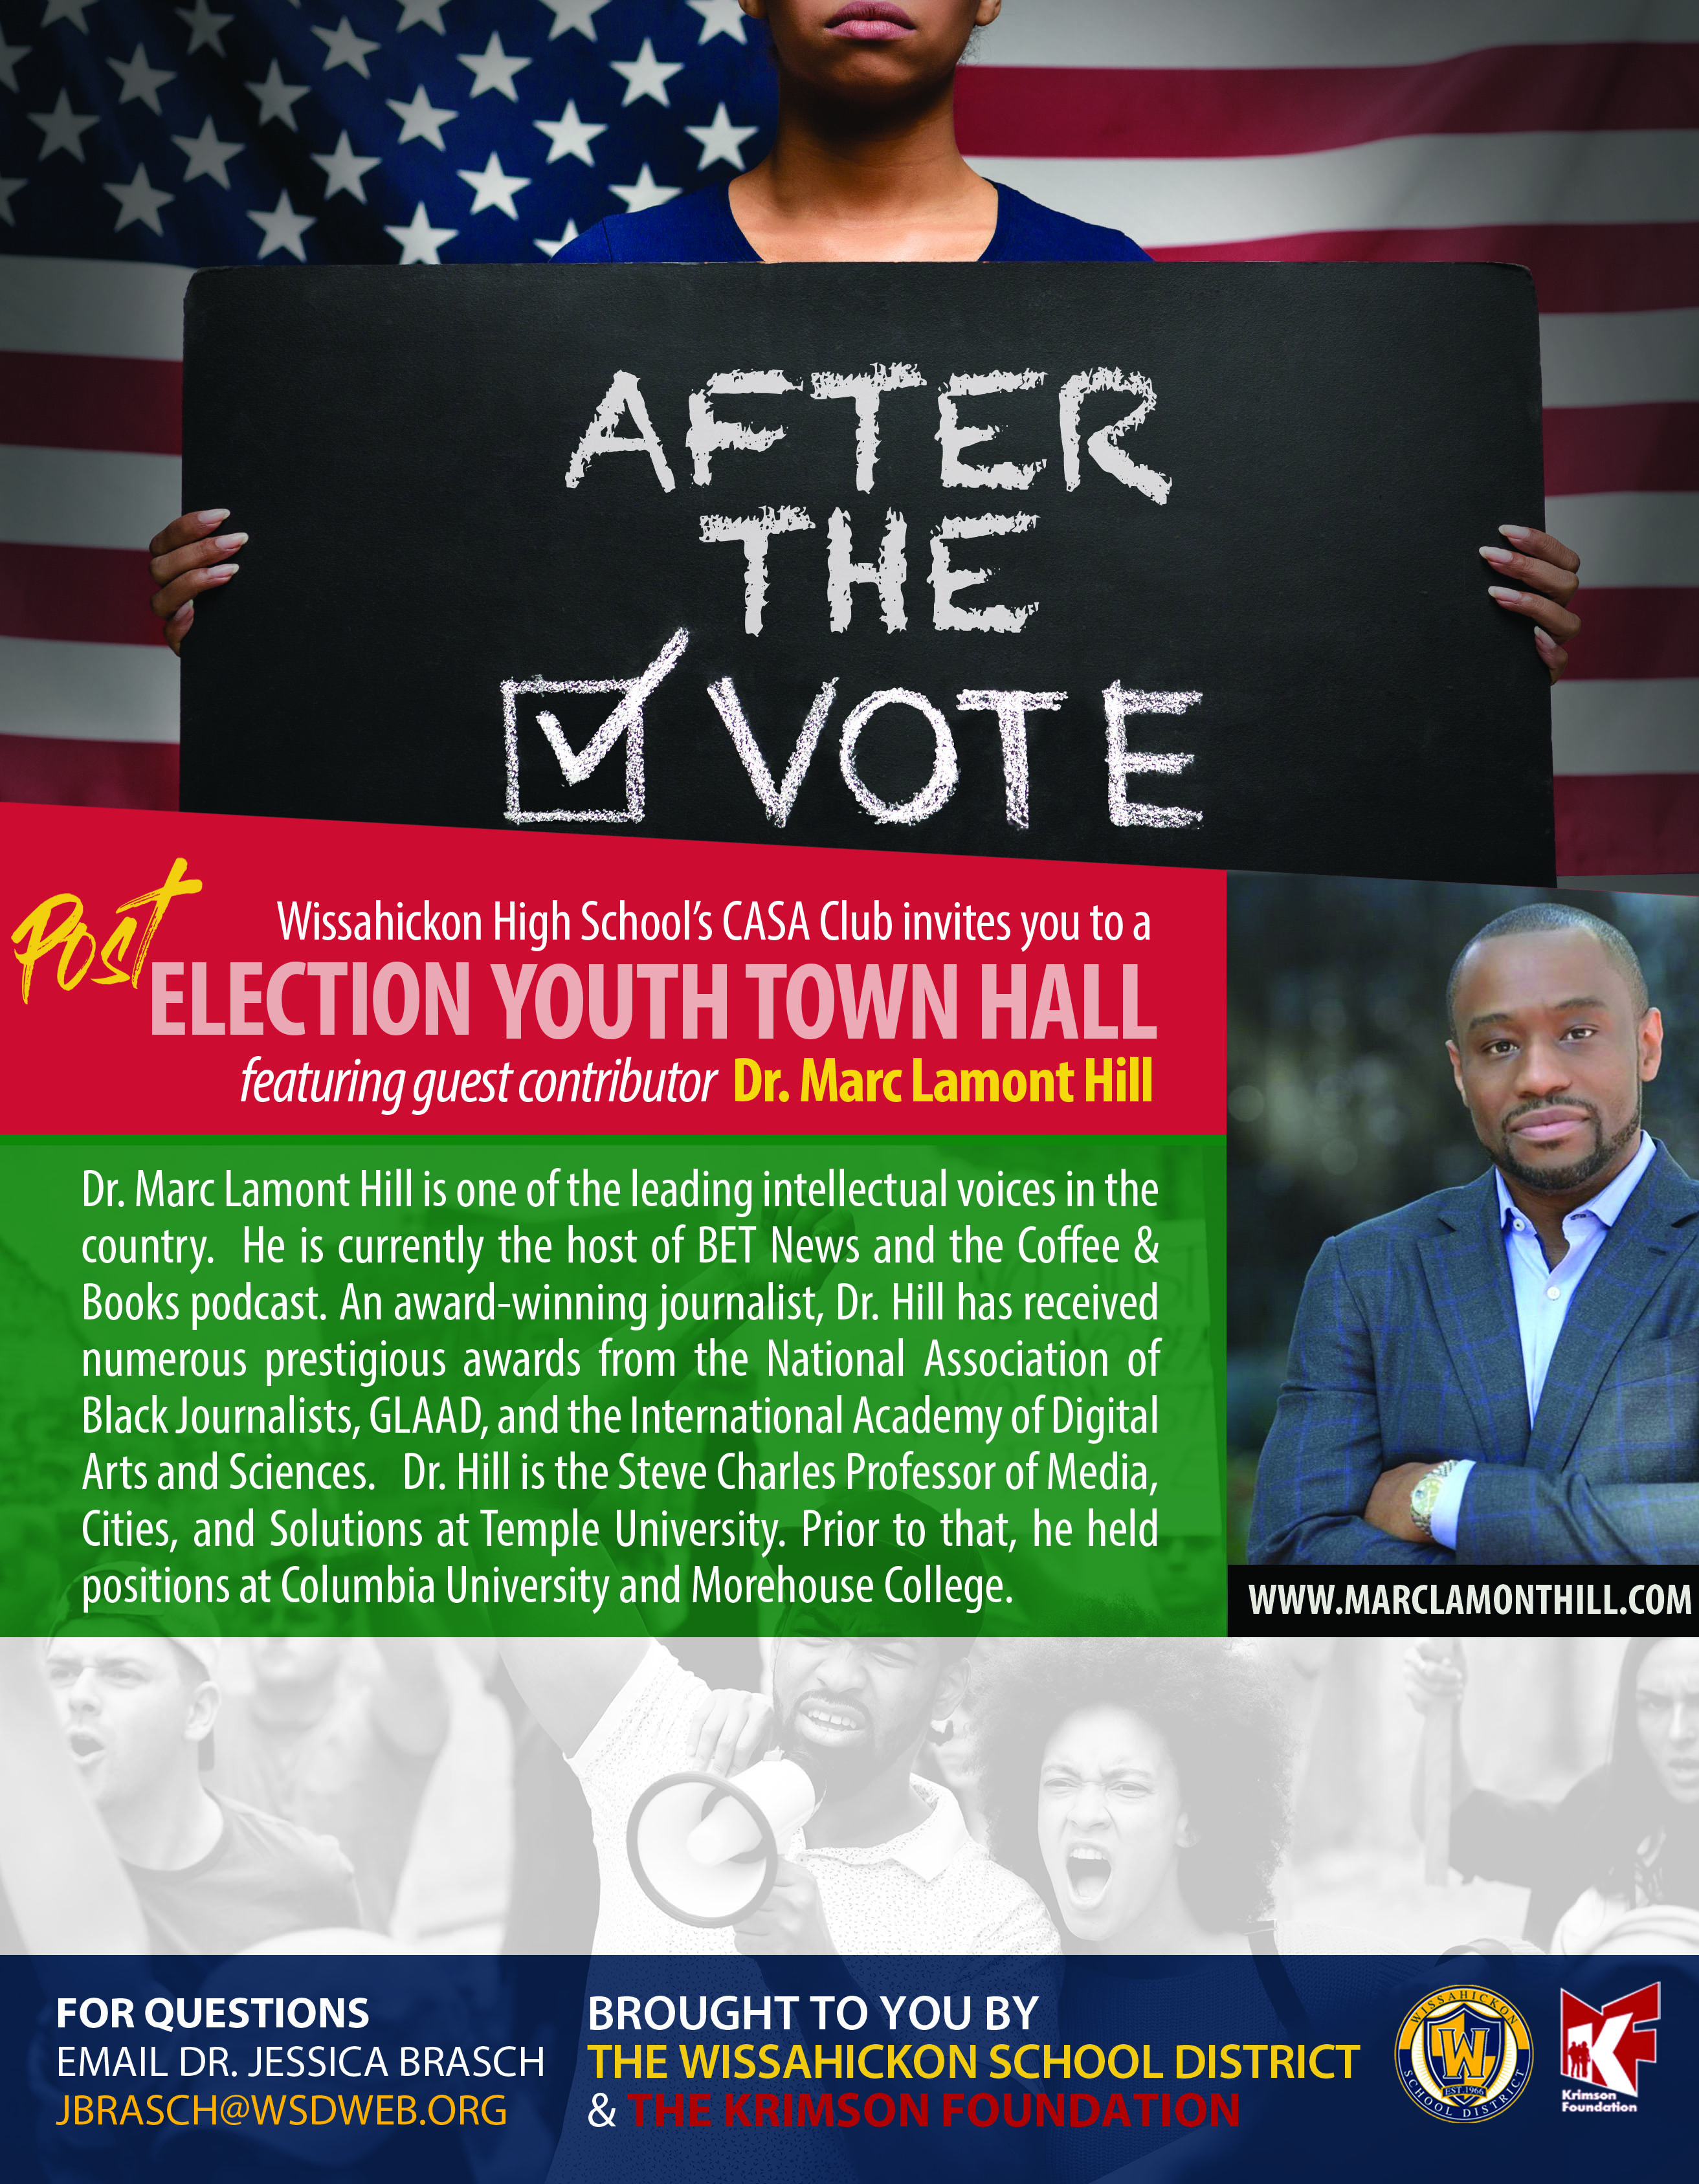  Post-Election-Youth-Town-Hall Flyer